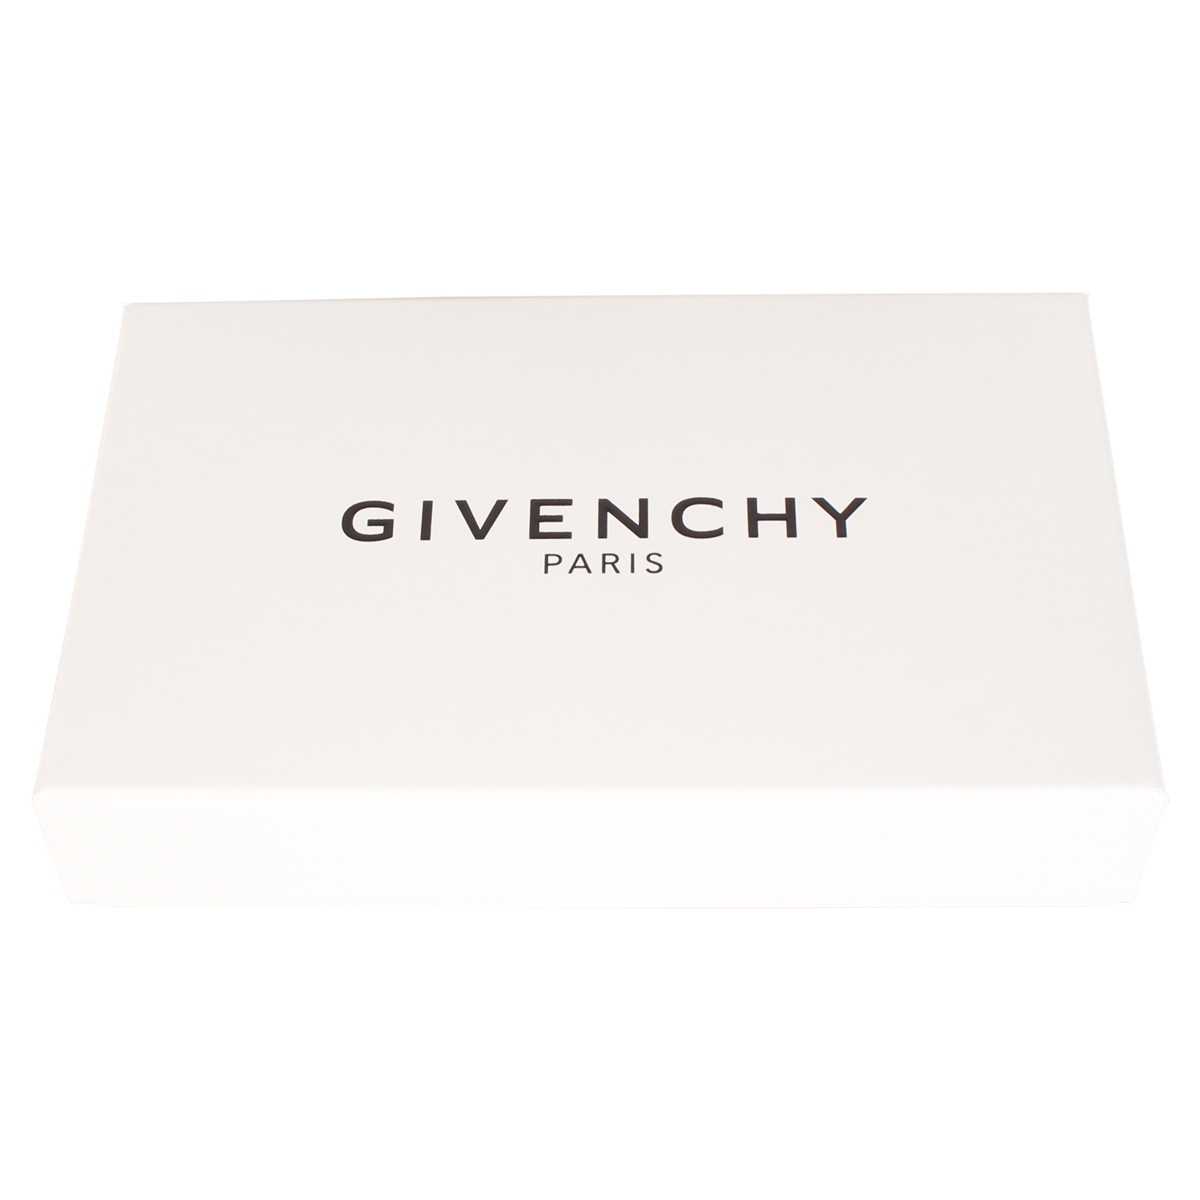 GIVENCHY 財布 長財... : バッグ・雑貨 : ジバンシー GIVENCHY 爆買い格安